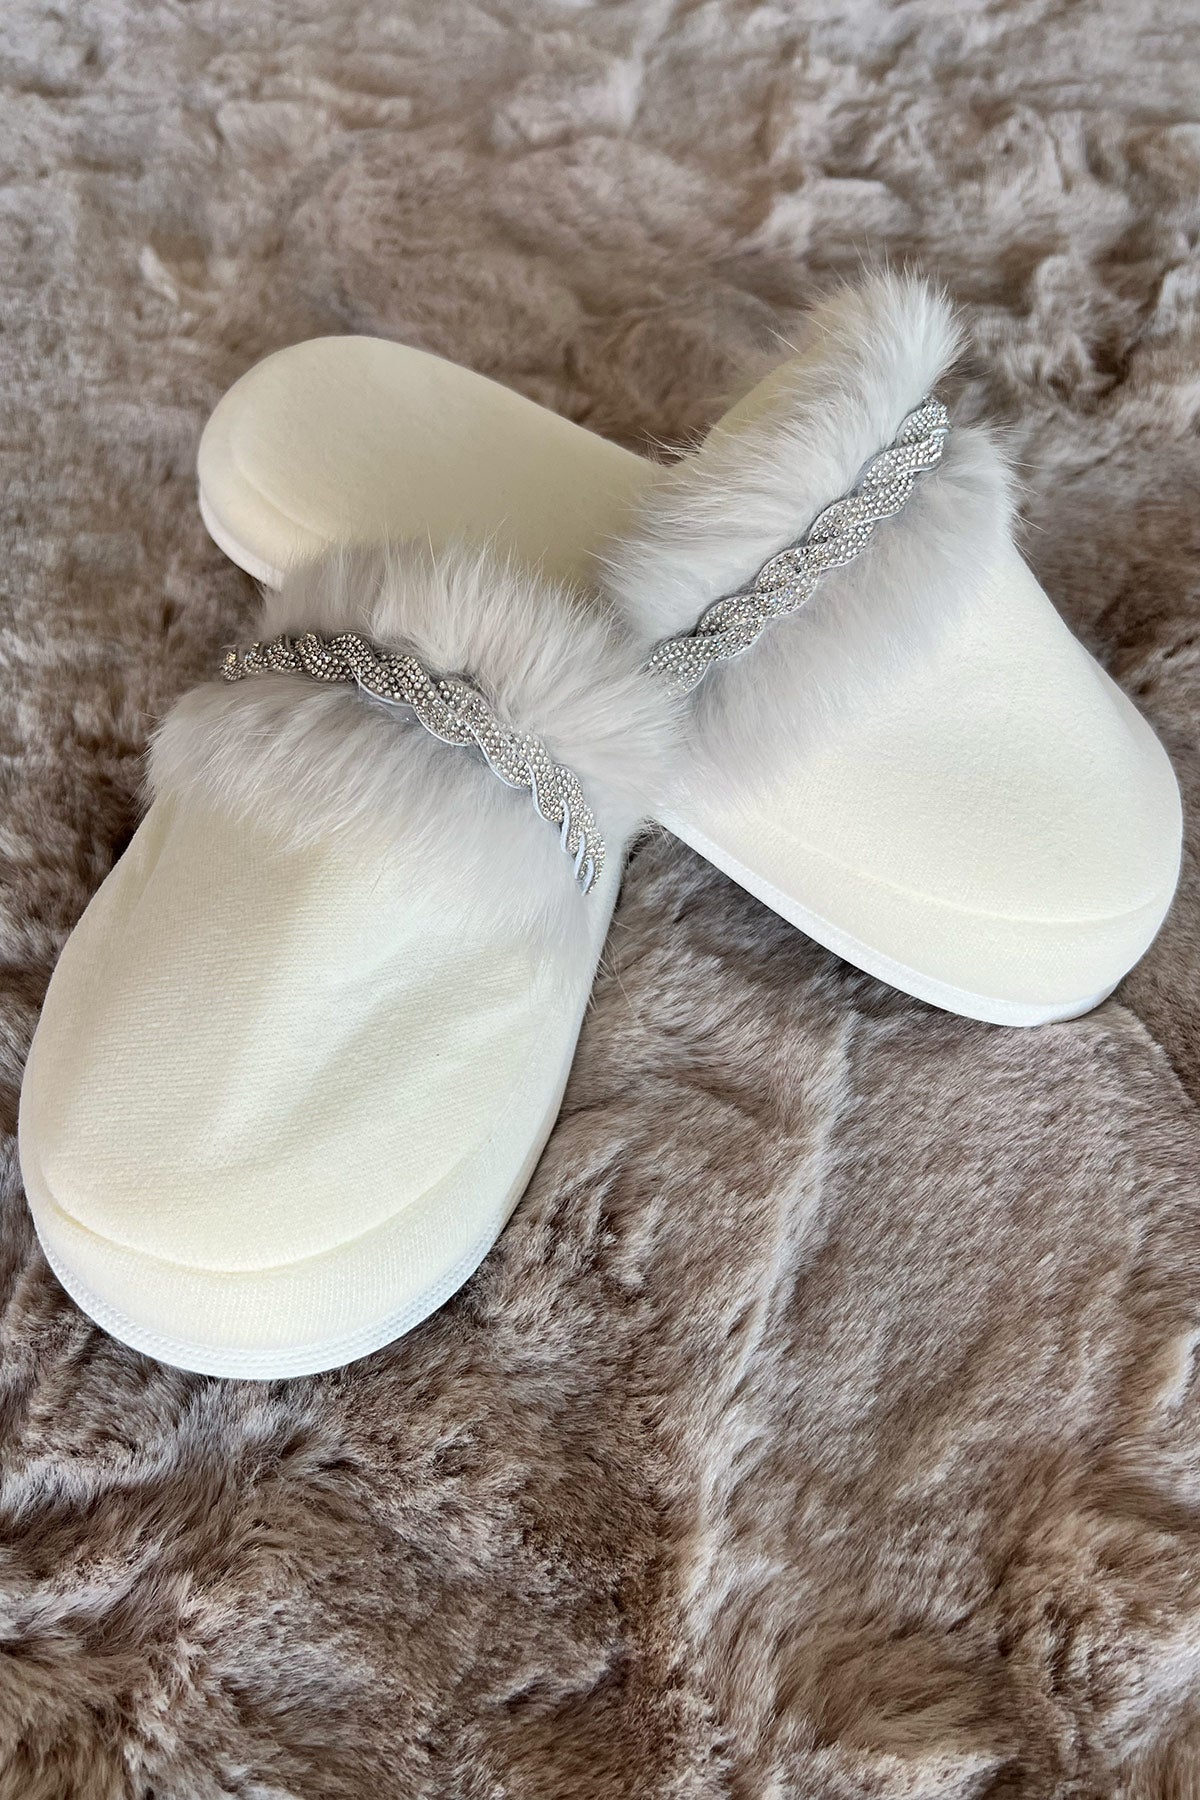 Shopymommy 75008 Feather Themed Maternity Slippers Grey